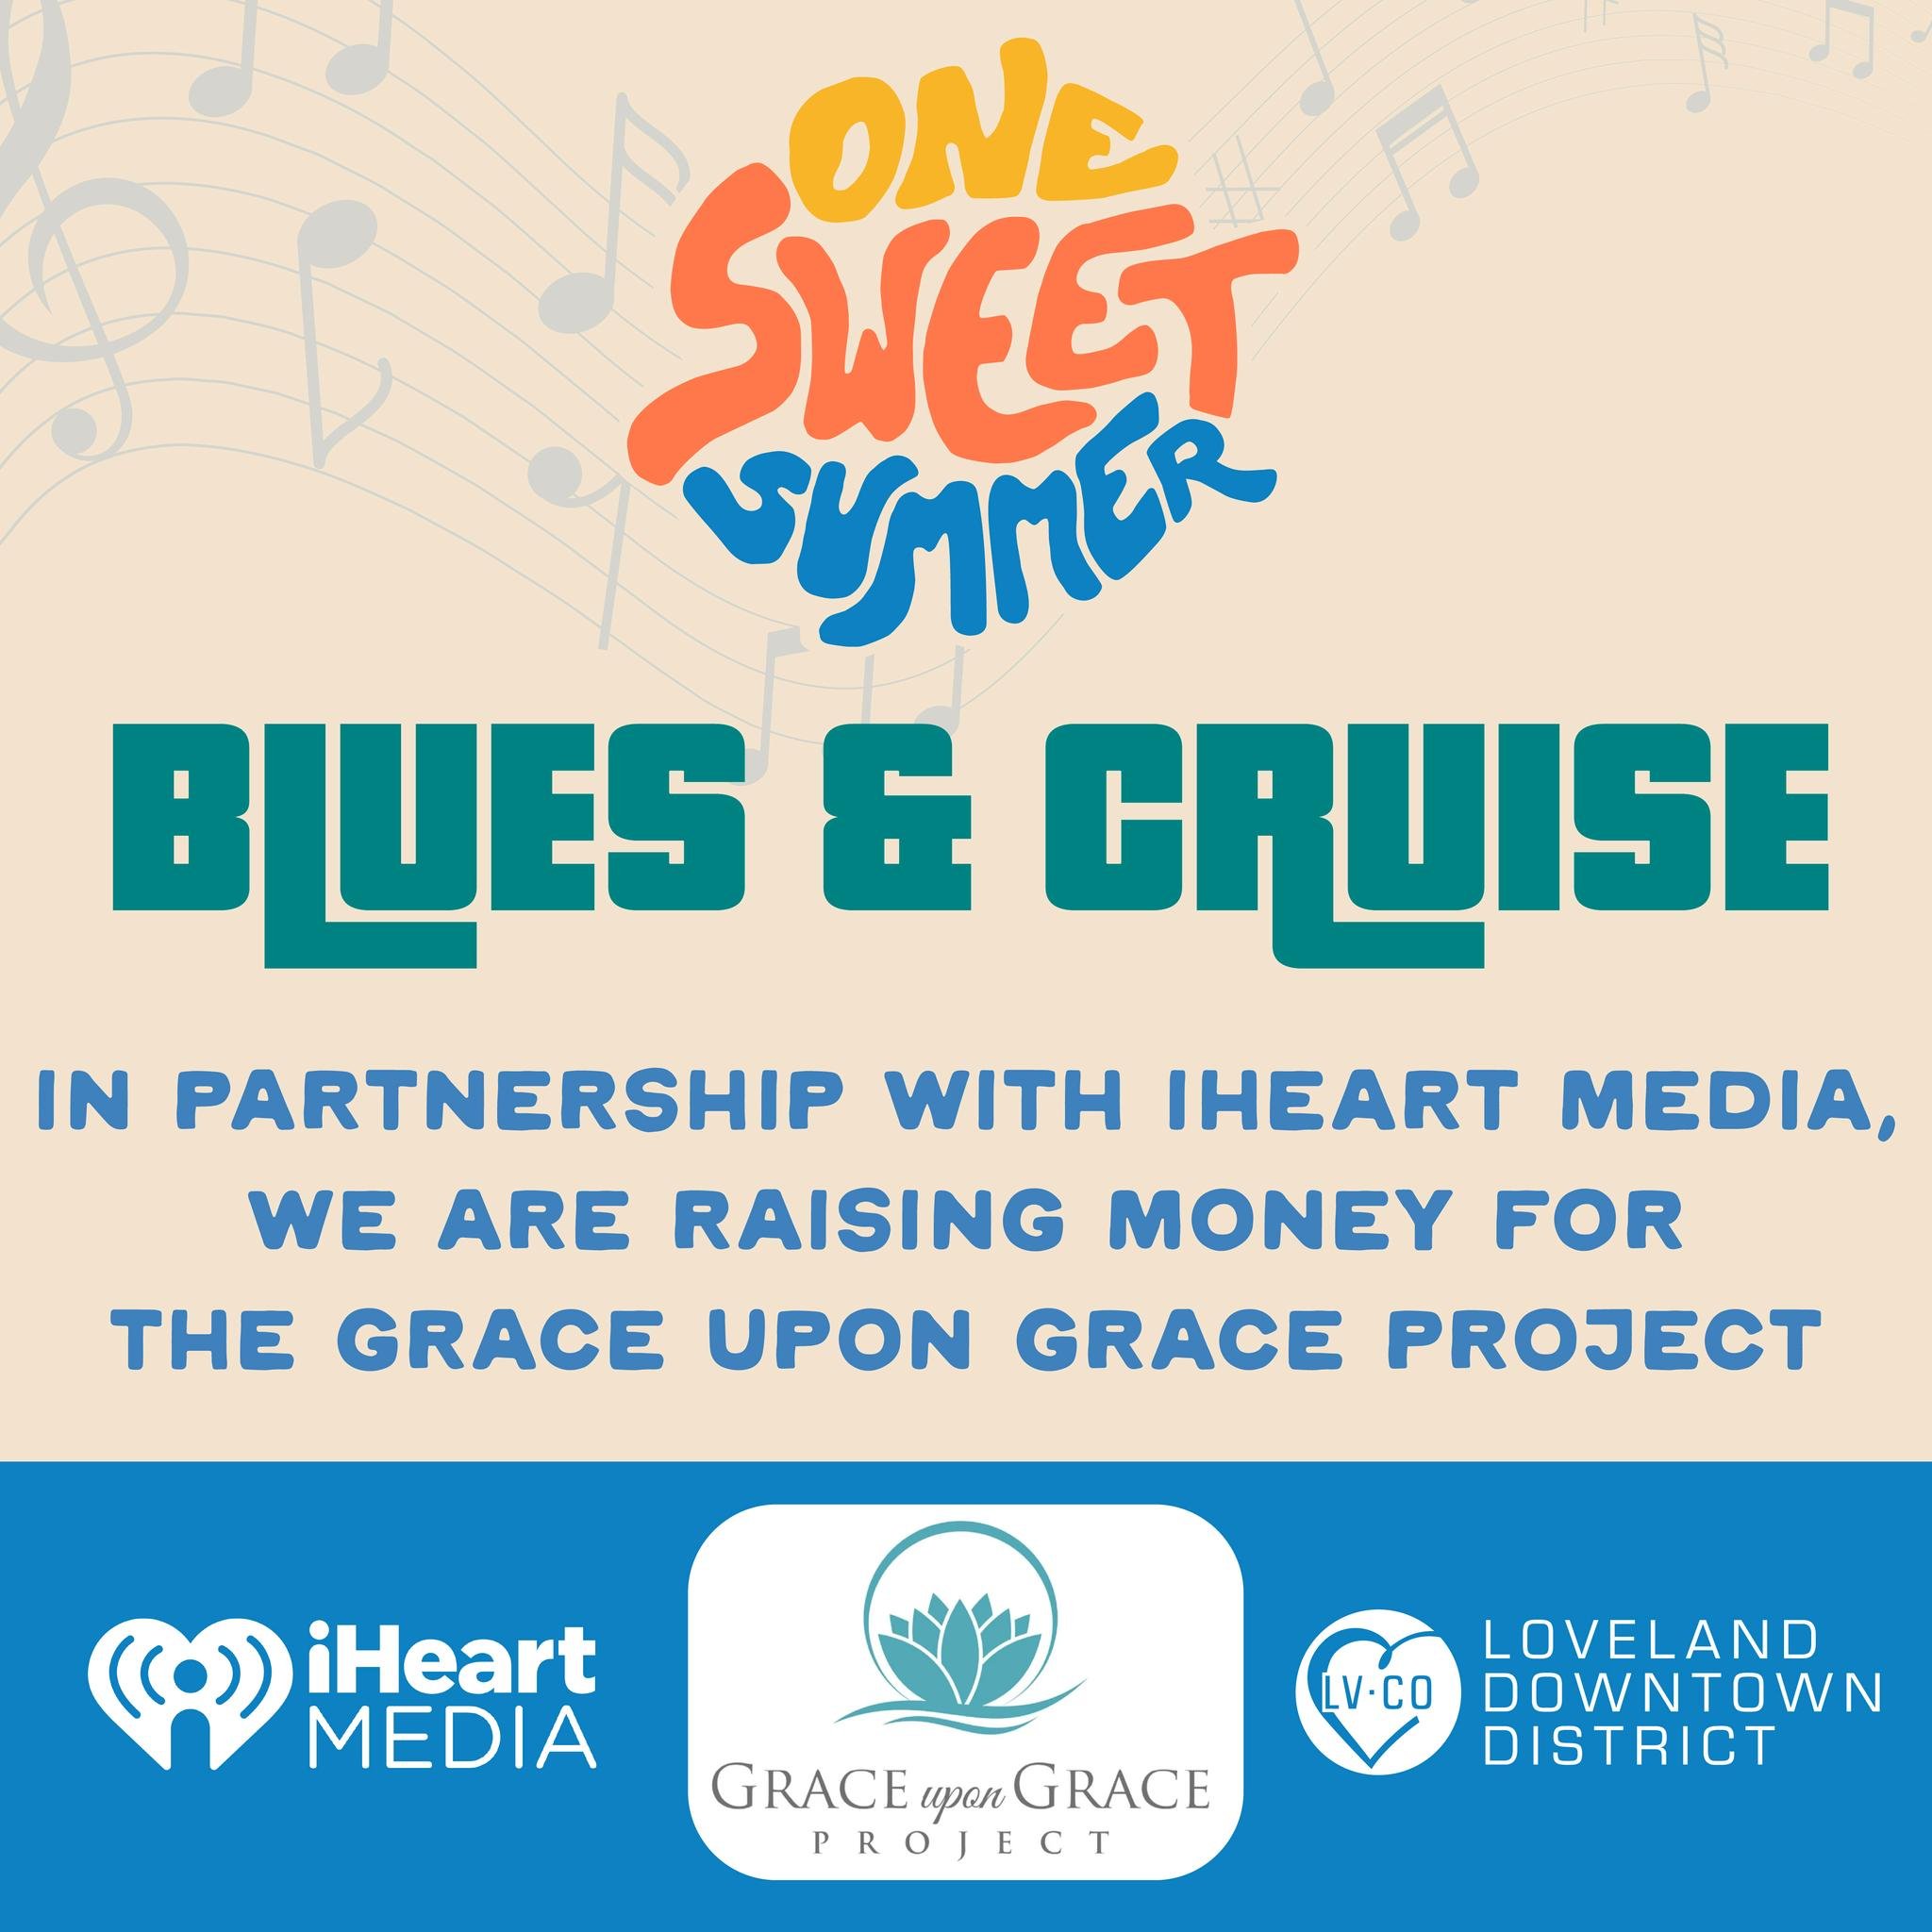 The Loveland Downtown District and iHeart Media are hosting a diaper drive at our Blues and Cruise event benefiting @graceupongraceproject! This Saturday bring an unopened pack of diapers to donate or add a donation to your purchase at our beverage t